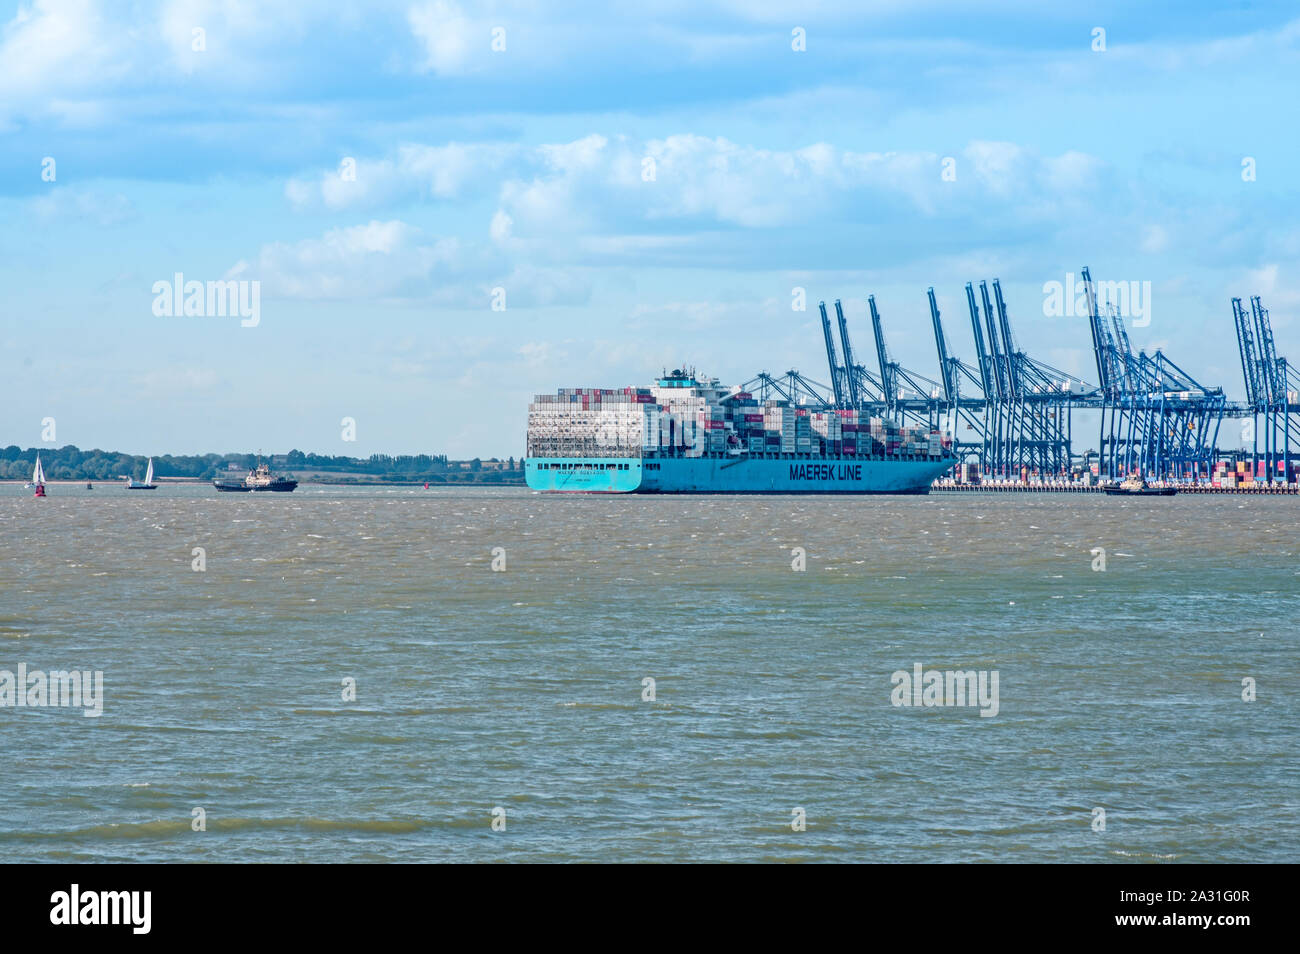 A container ship leaving Felixstowe laden with containers Stock Photo